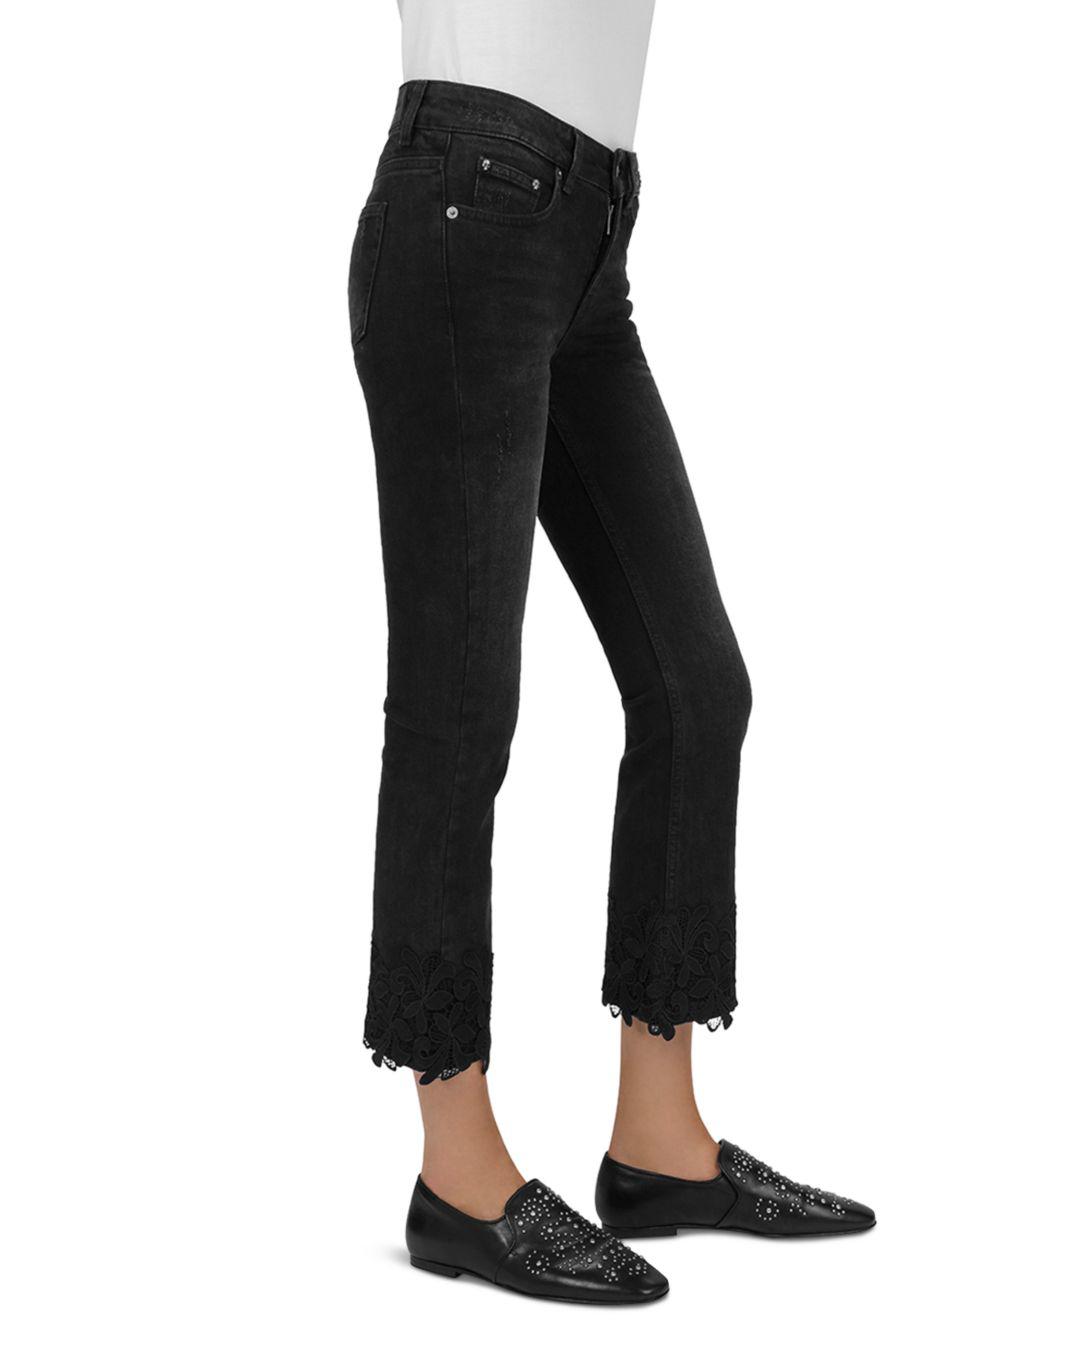 Lyst - The Kooples Lace Hem Cropped Flare Jeans In Black Washed in Black